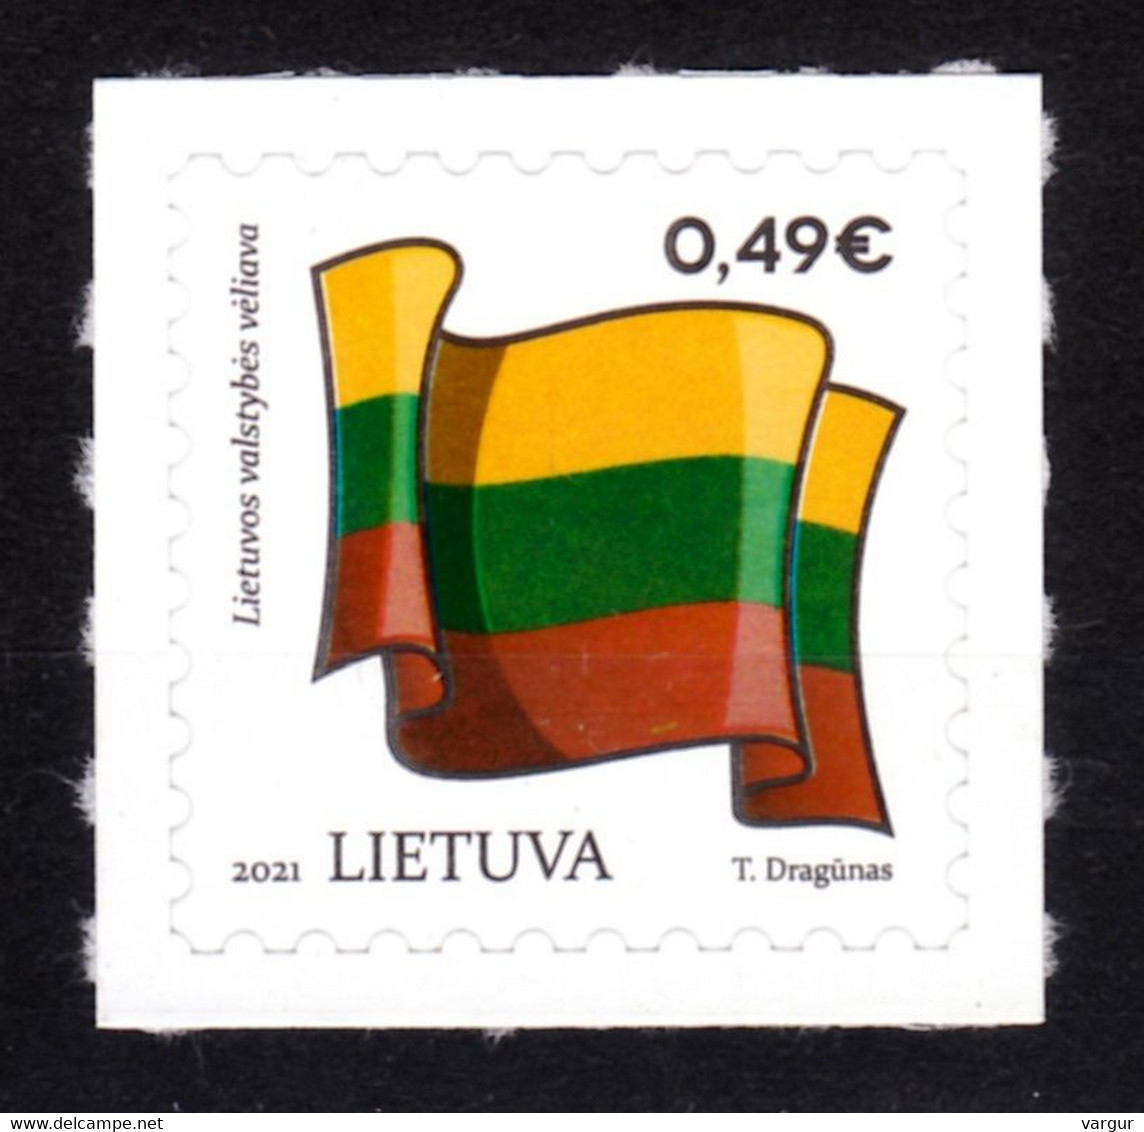 LITHUANIA 2021-12 Definitive: Flag, 49c Re-print With New Date, MINT Adhesive - Briefmarken